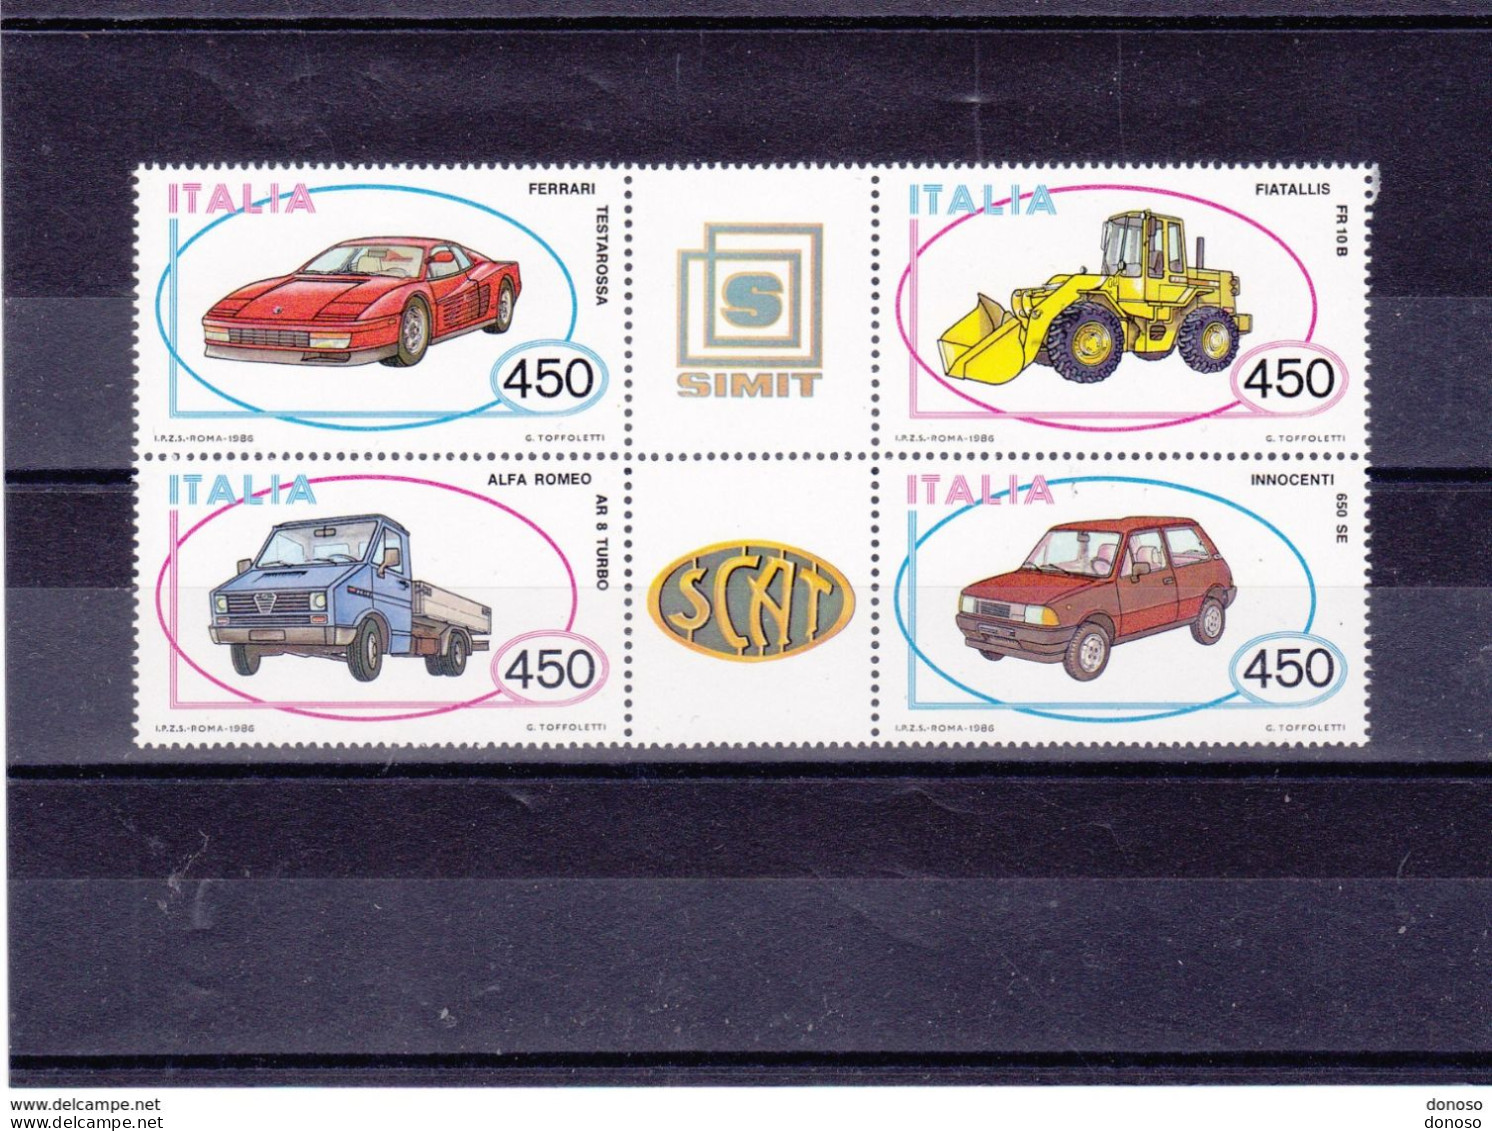 ITALIE 1986 CONSTRUCTIONS AUTOMOBILES III Yvert 1712-1715, Michel 1980-1983 NEUF** MNH Cote :yv 18 Euros - 1981-90: Mint/hinged